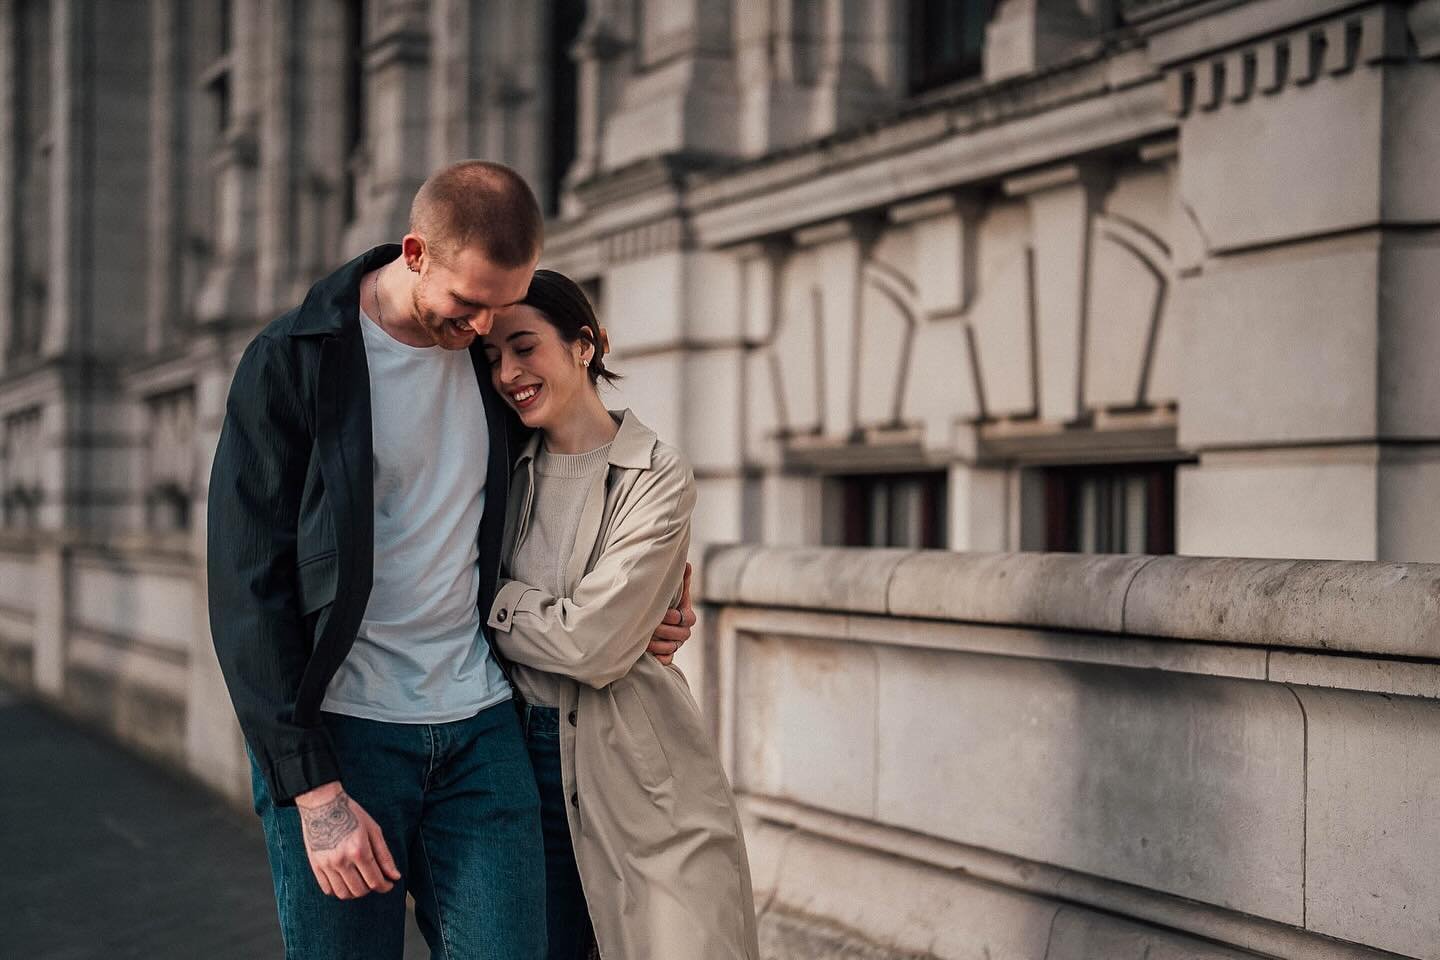 One from Jack + Elena&rsquo;s couple shoot in Kensington.
.
.
.
.
.
#londoncoupleshoot #londoncouplephotographer #londoncouplesphotographer #londonweddingphotographer #kensington #kensingtonphotographer #londonportraits